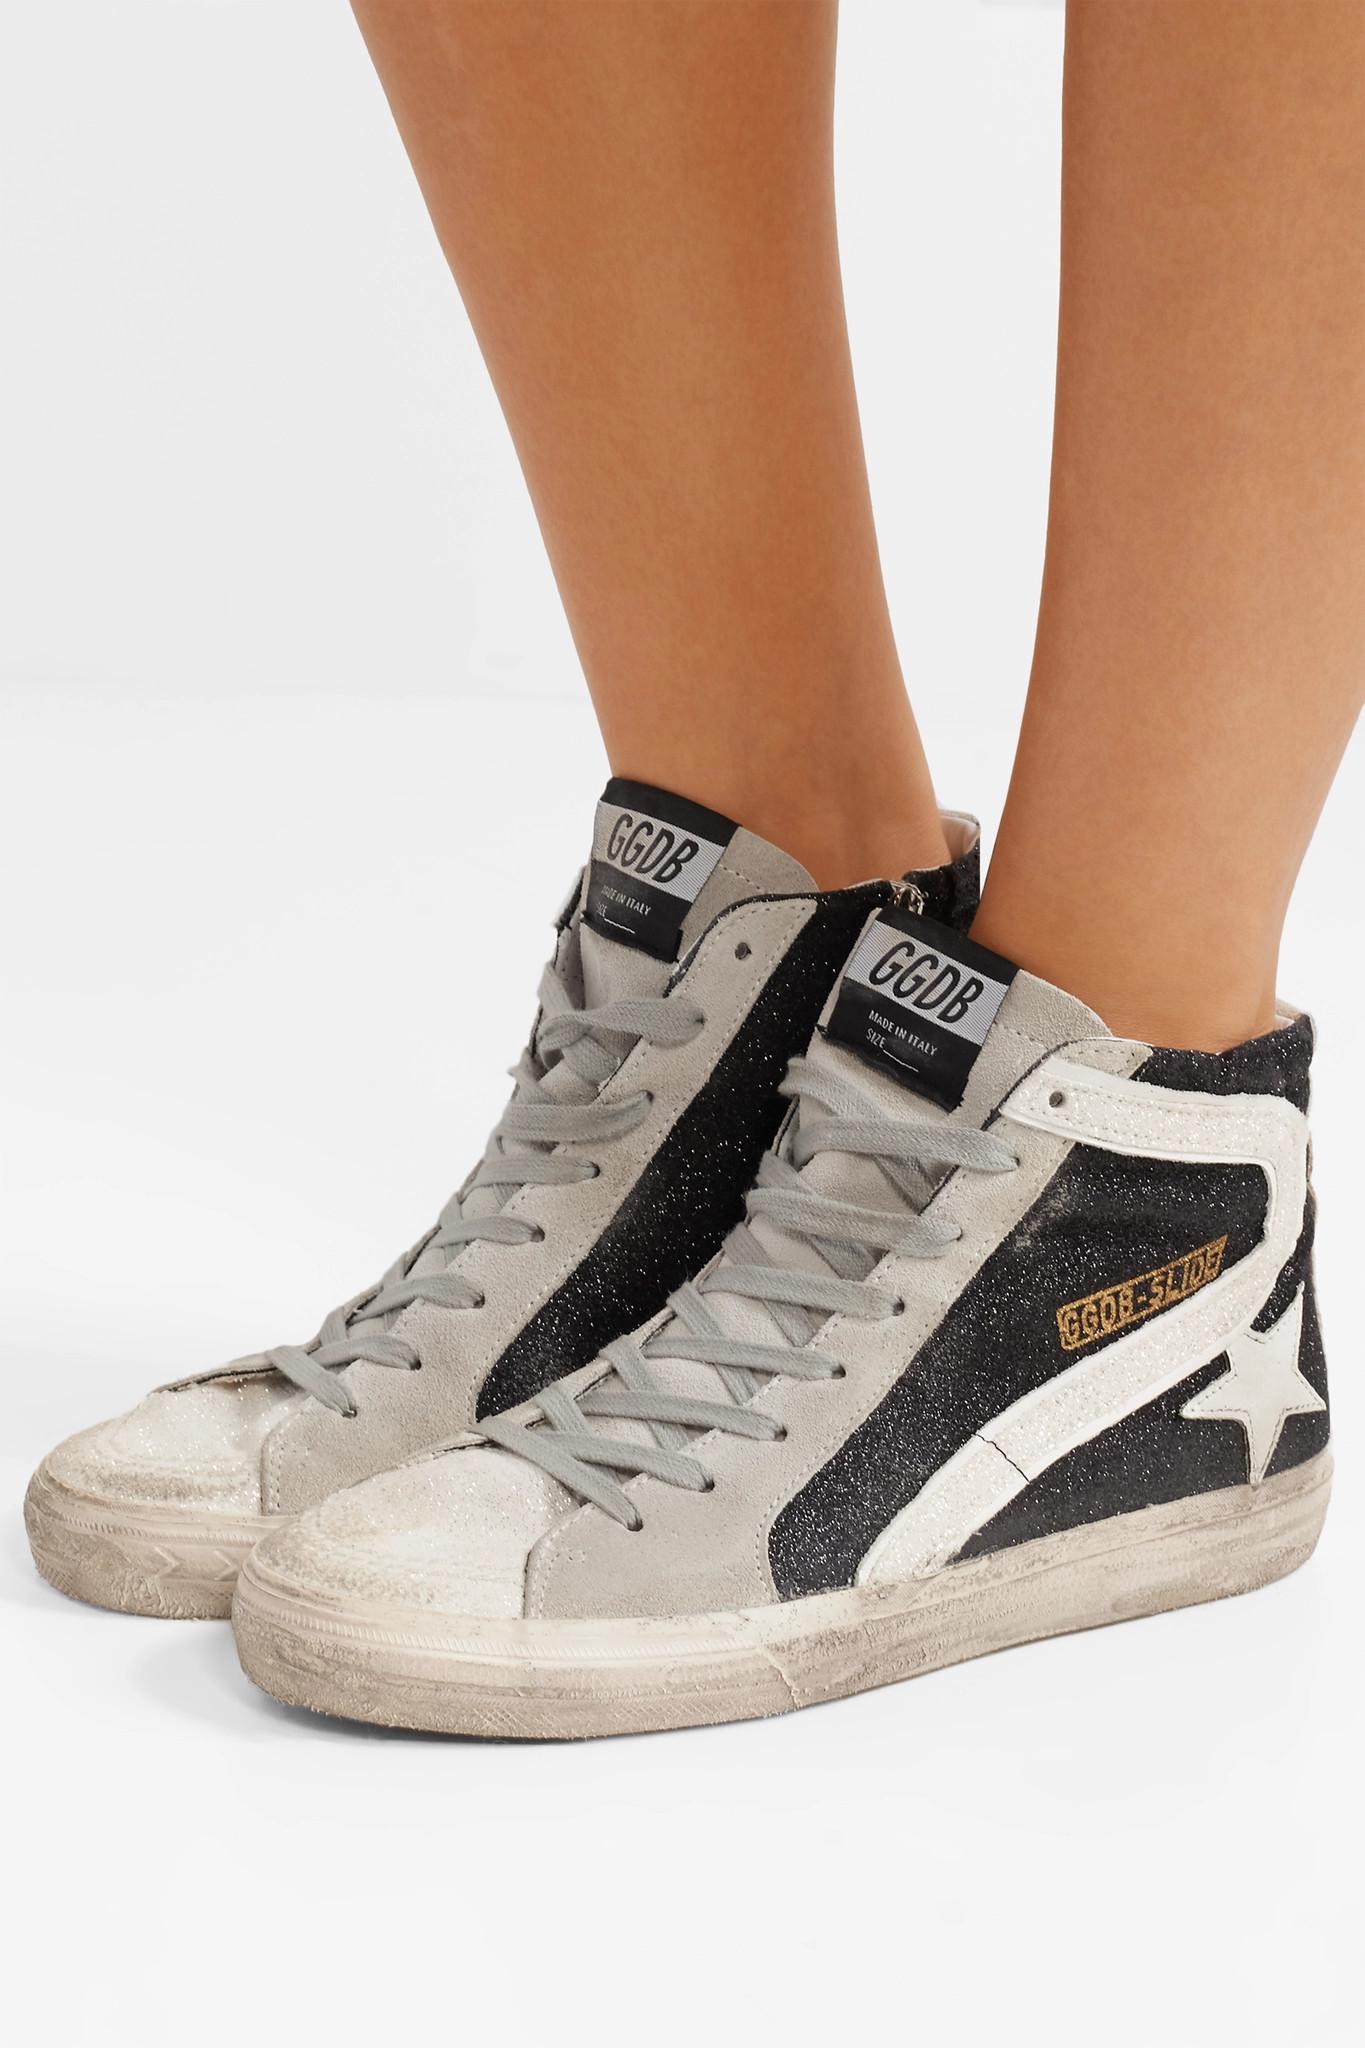 Golden Goose Slide Glittered Distressed Suede High-top Sneakers in Black |  Lyst